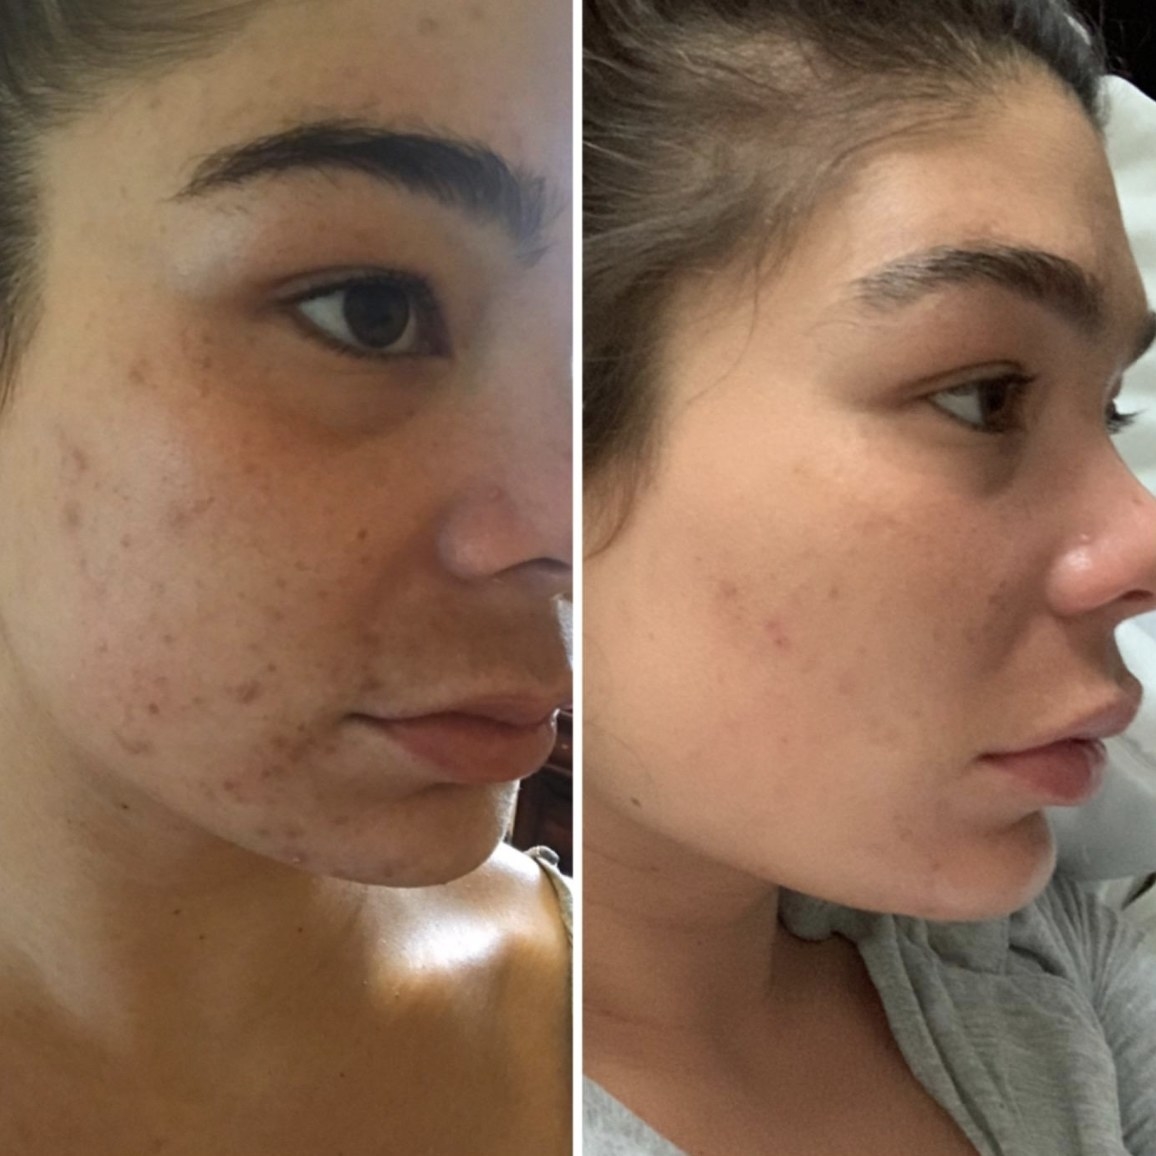 before and after photos of a person with acne